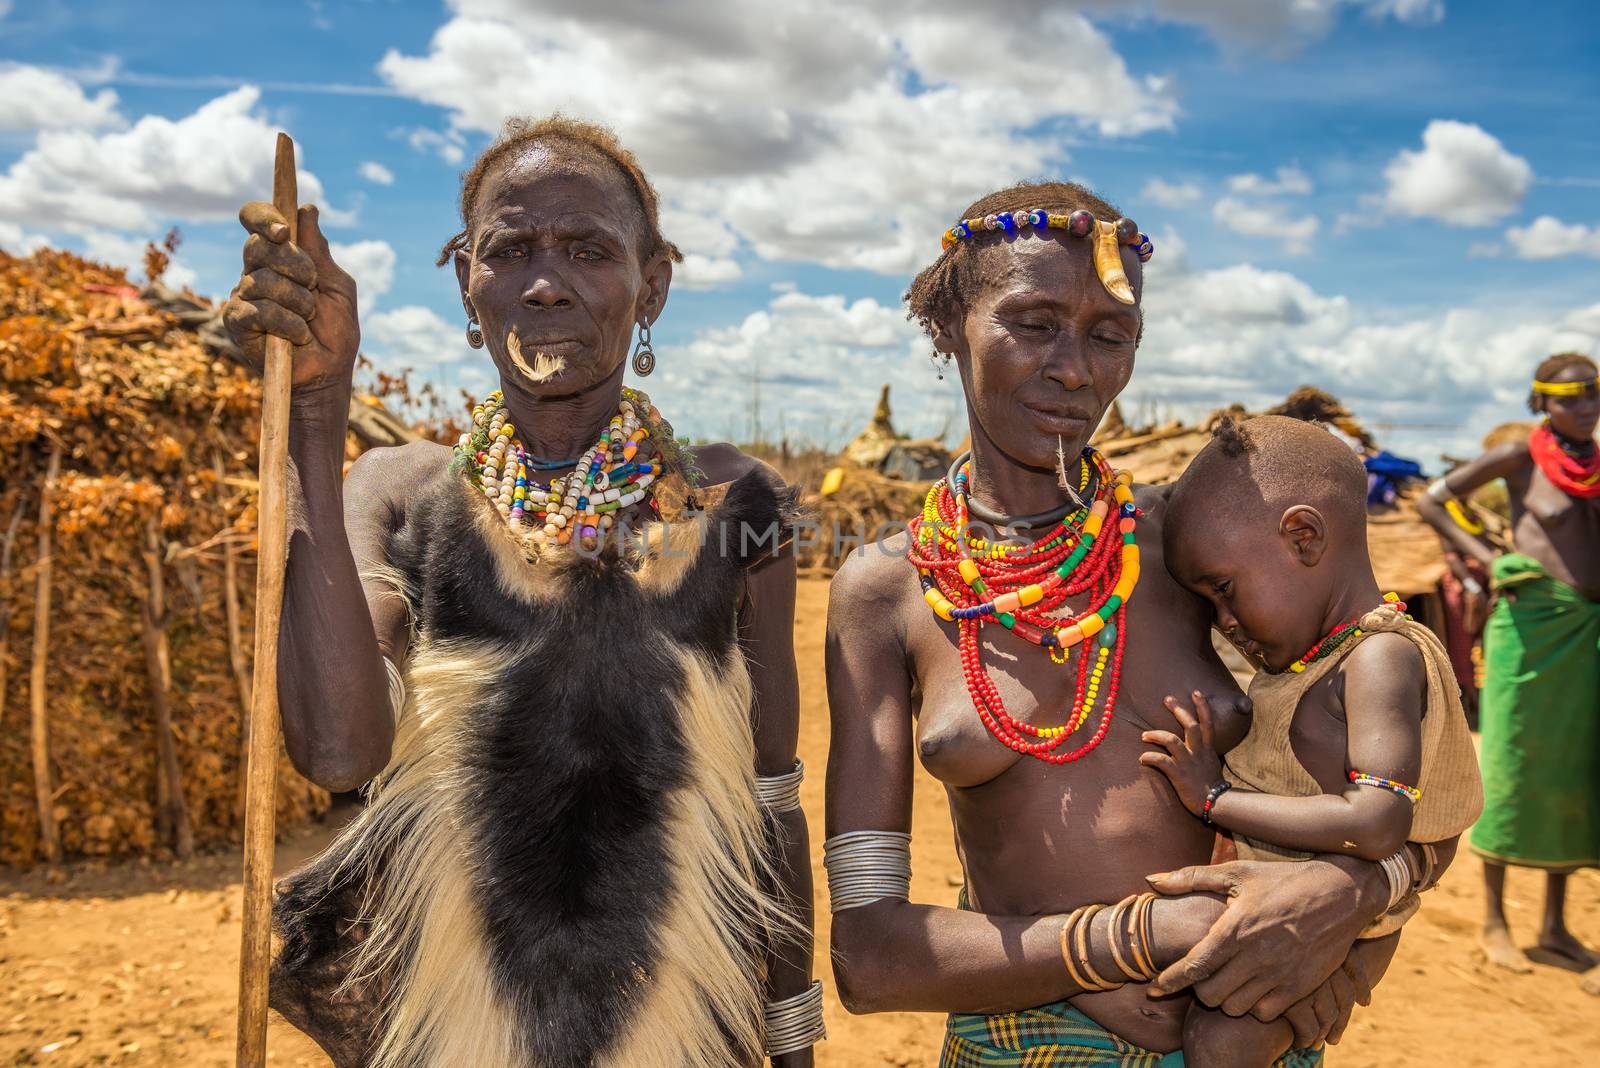 Tribal chief from the african tribe Dasanesh with his family, Ethiopia by nickfox